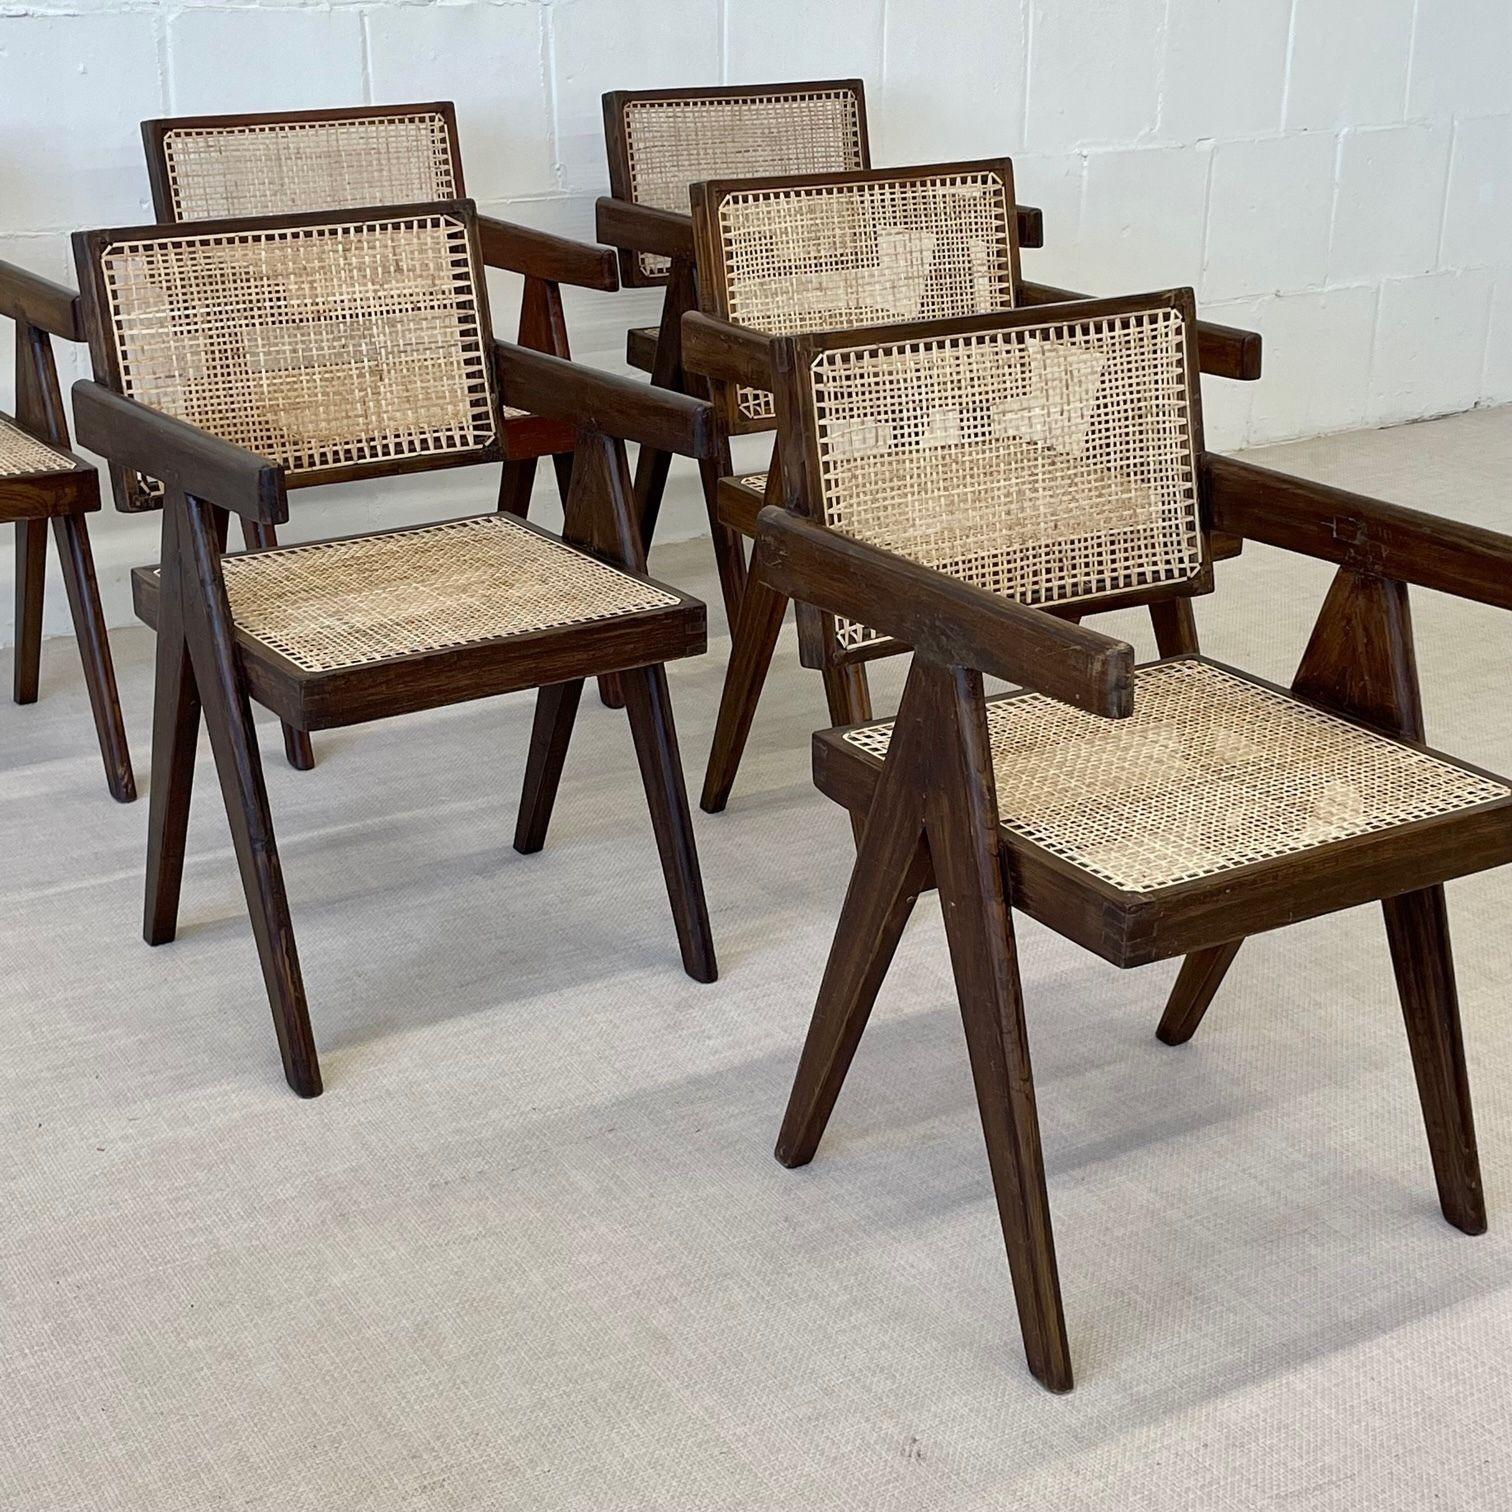 Indian Six Mid Century Modern Pierre Jeanneret Floating Back Chairs, Teak, Cane, 1950s